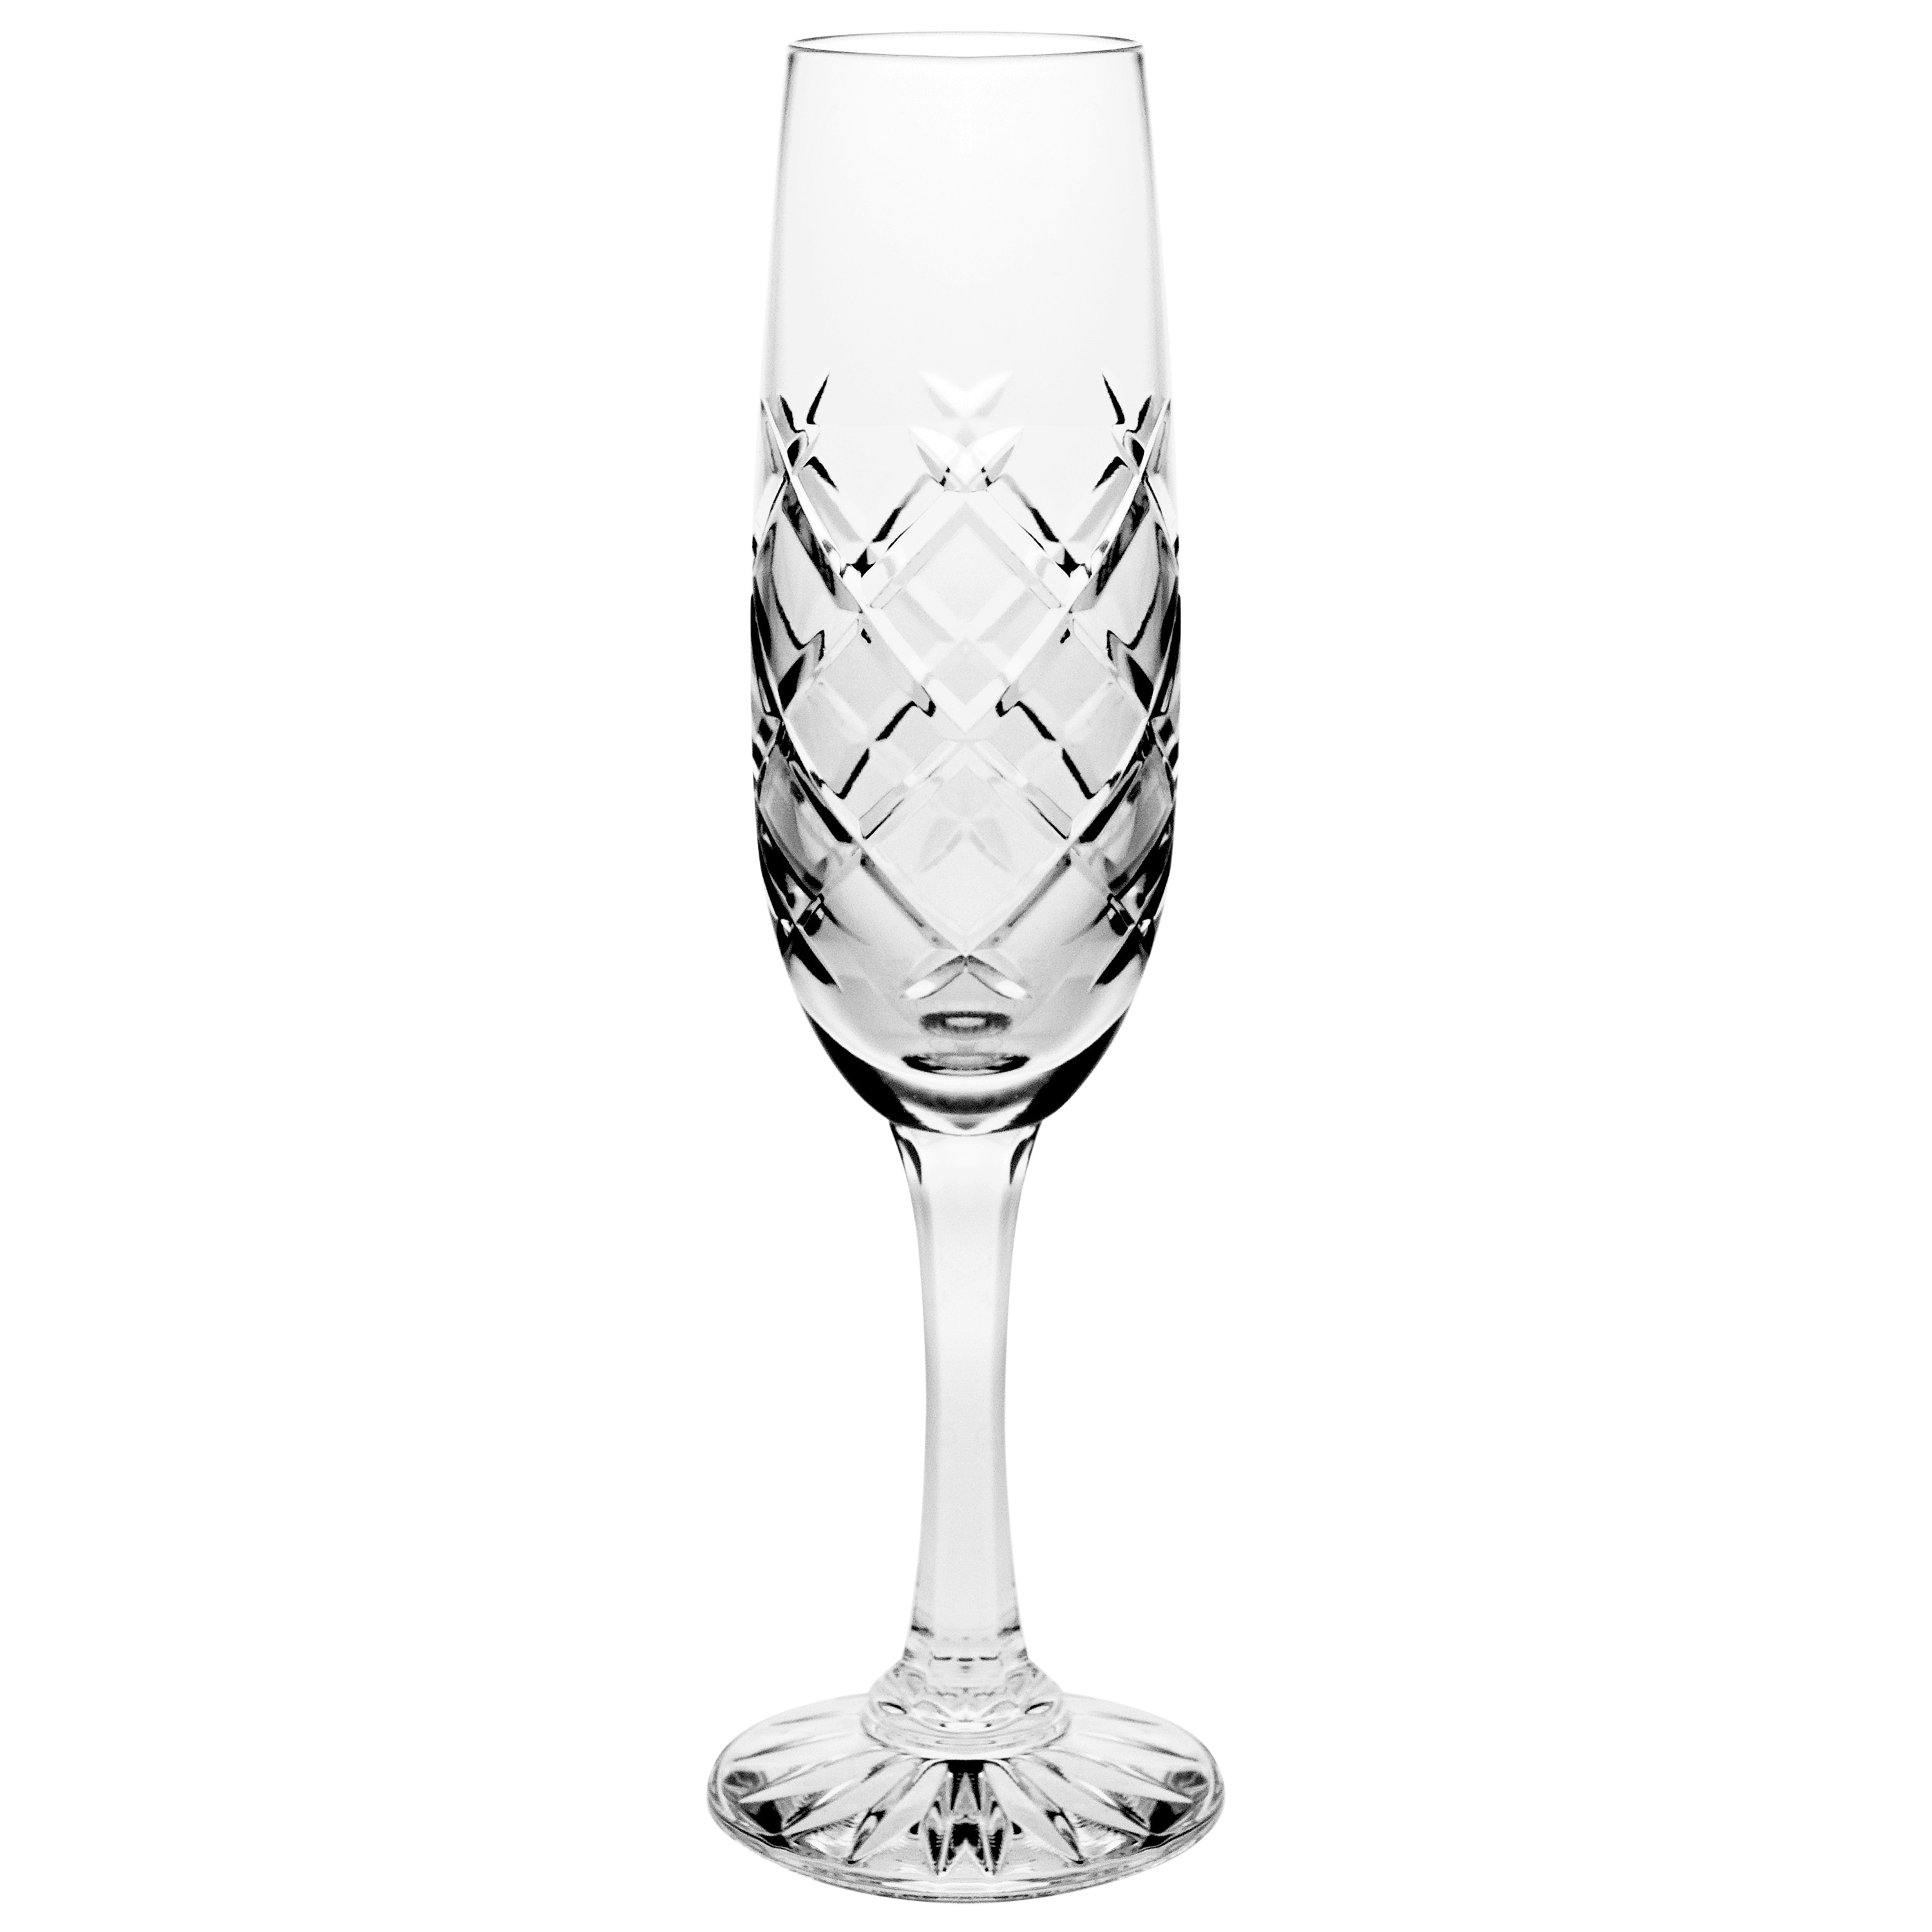 champagne and glasses set